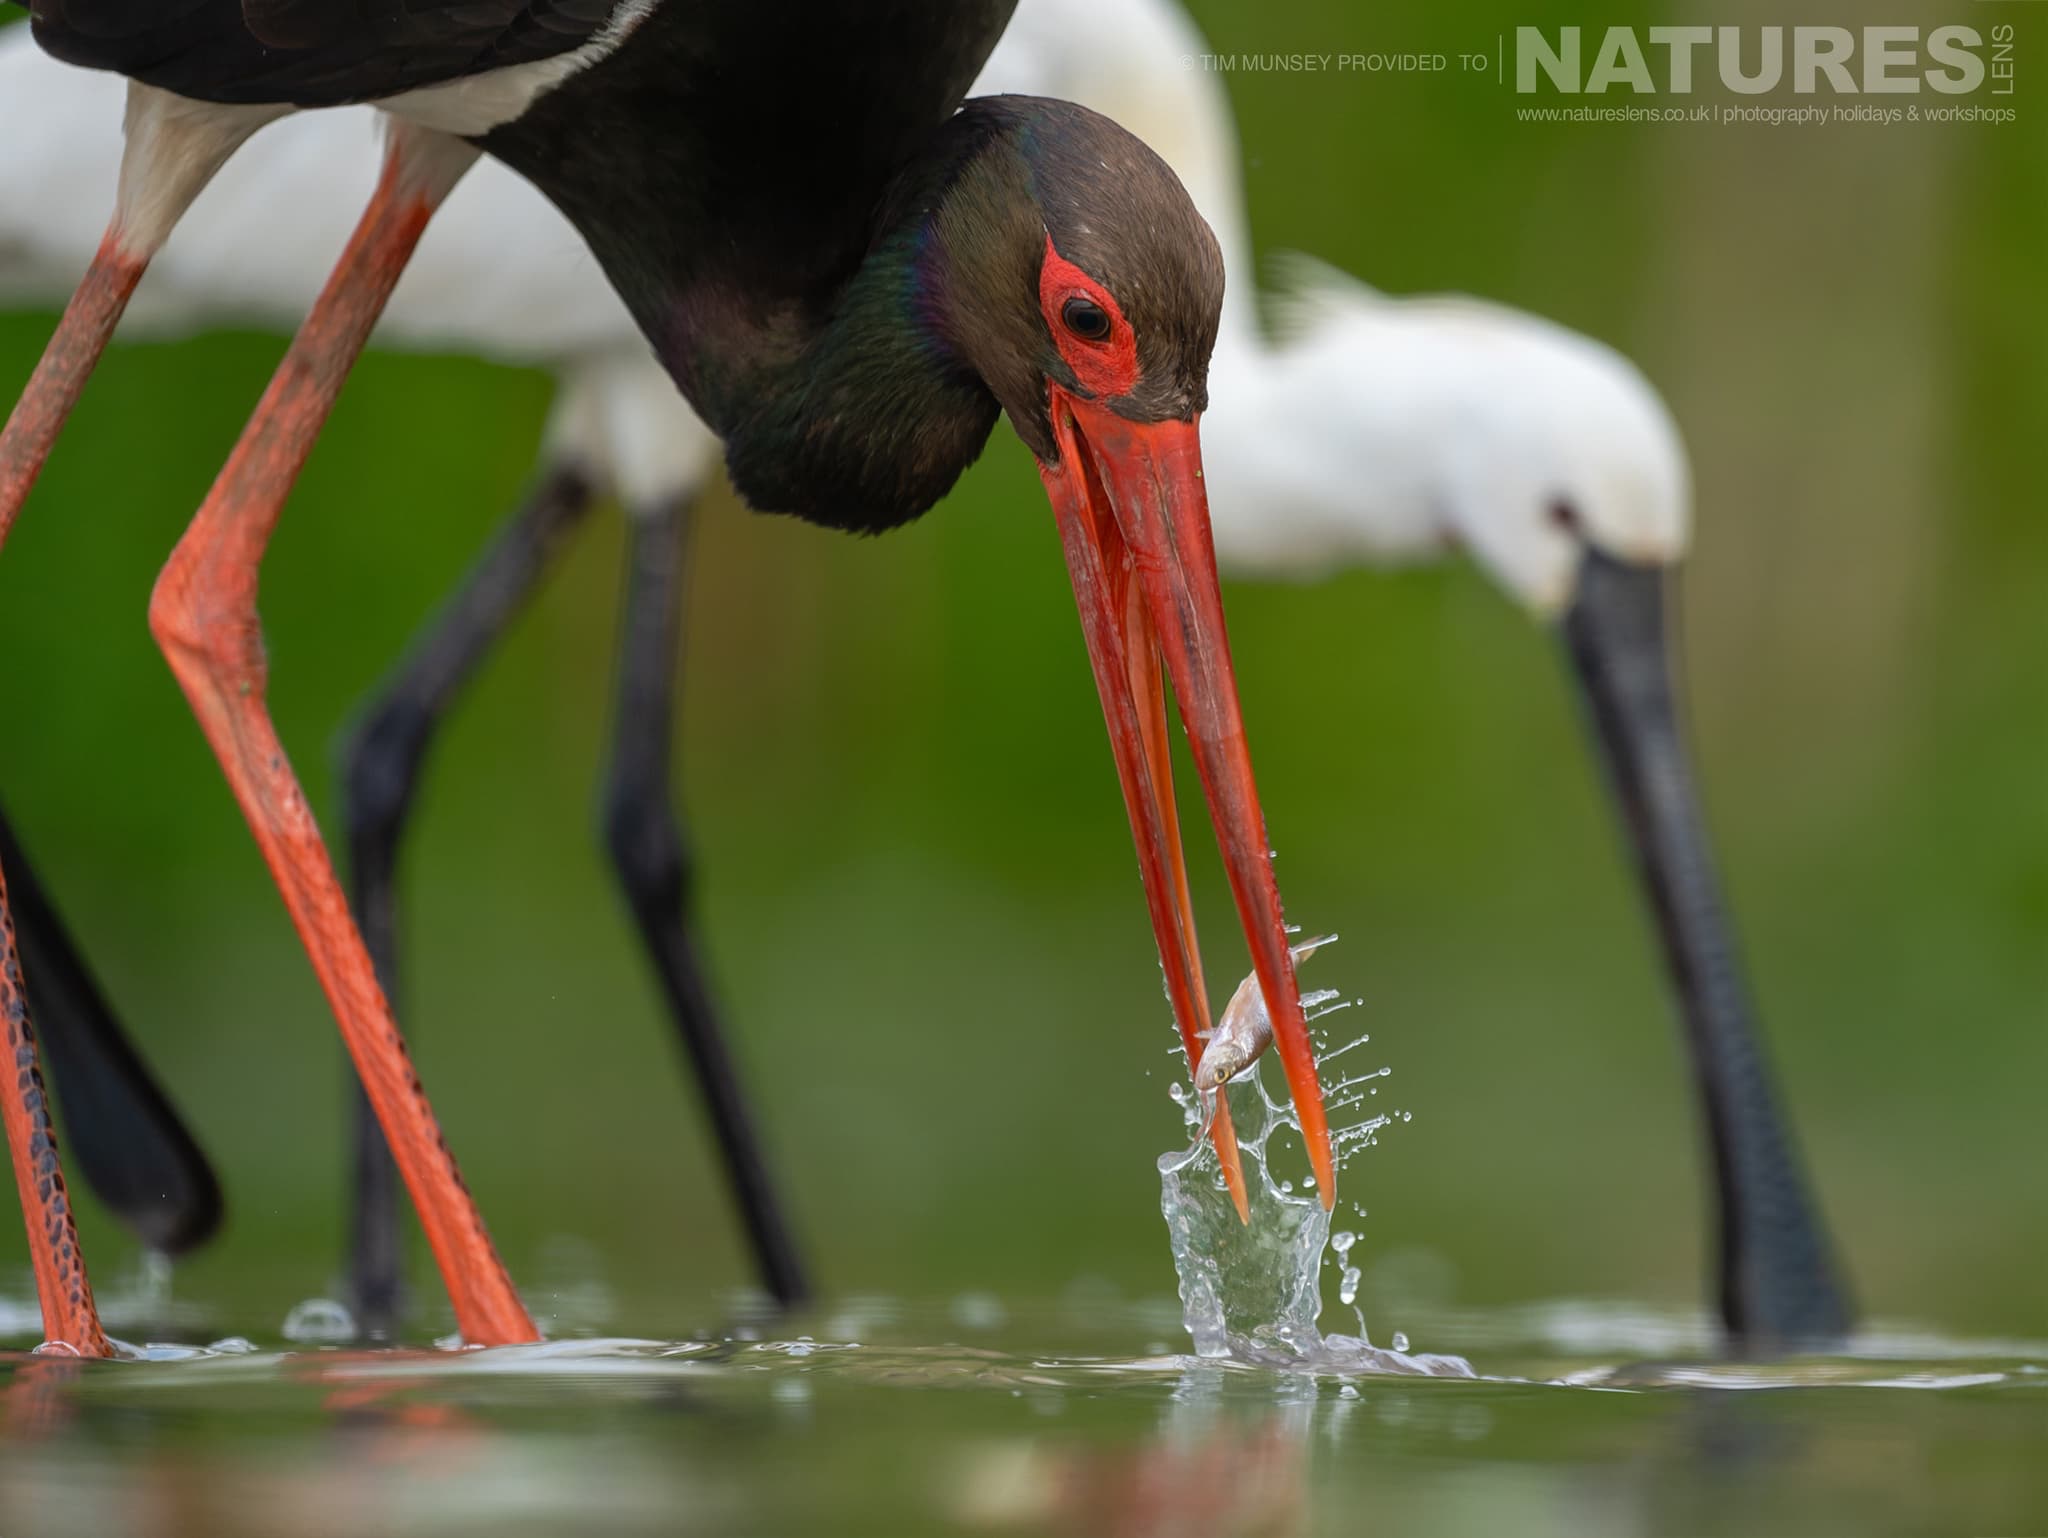 A Black Stork Feeds At One Of The Ponds With Eurasian Spoonbills Behind Photographed At Bence Máté's Hides In Hungary During the Natureslens Wildlife Photography Hides of Hungary Holiday